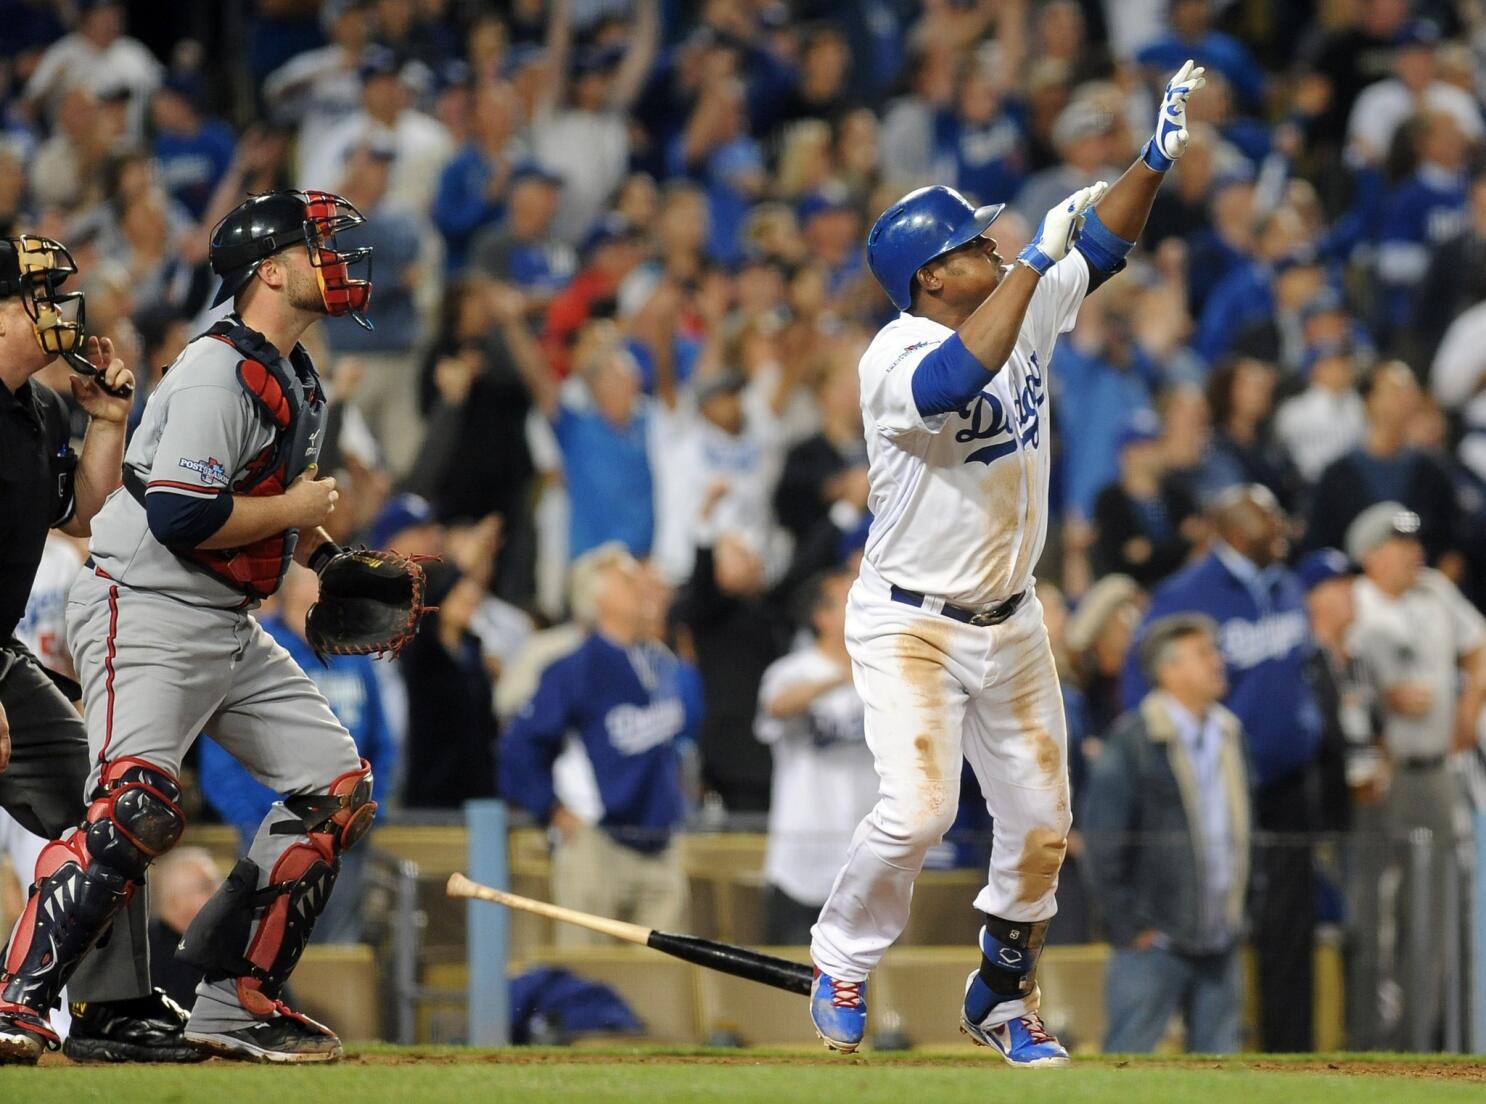 Not in Hall of Fame - 2. Carl Crawford